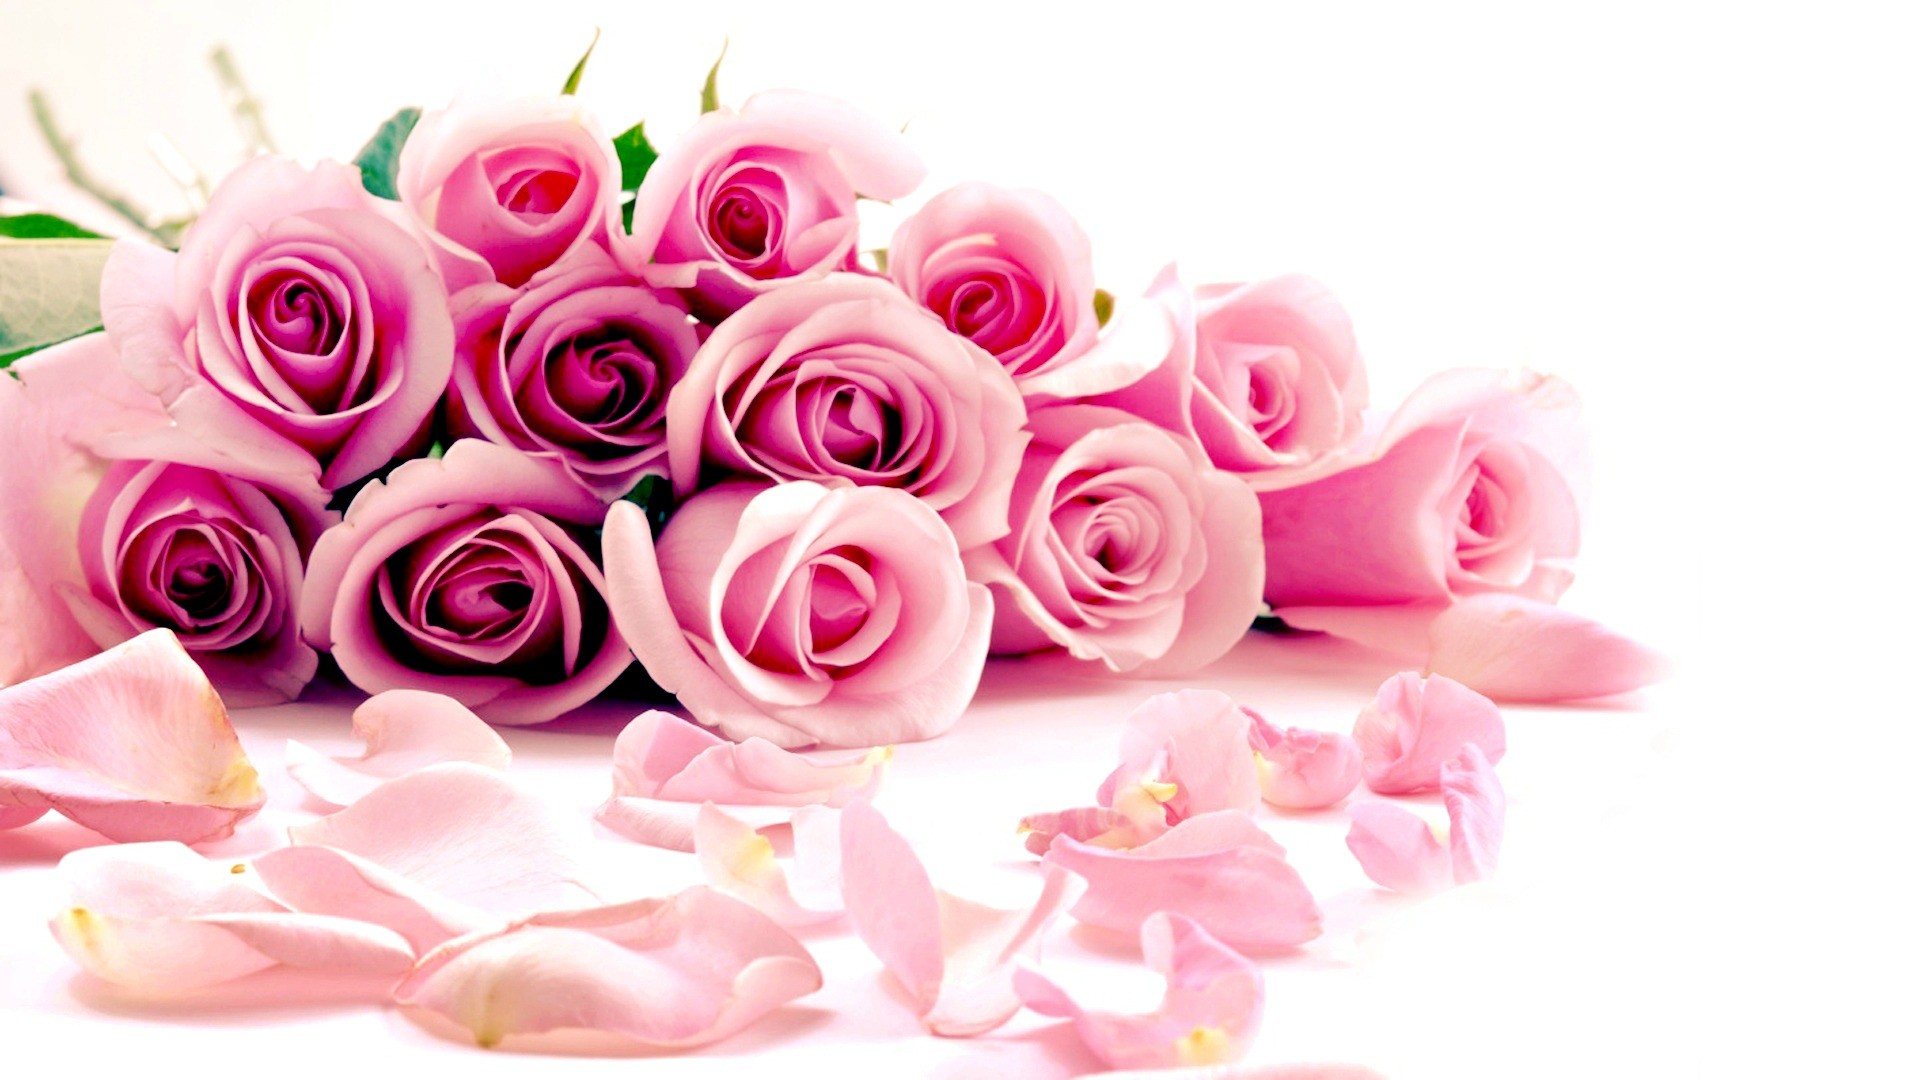 1920x1080 70 beautiful rose flowers wallpapers Pictures